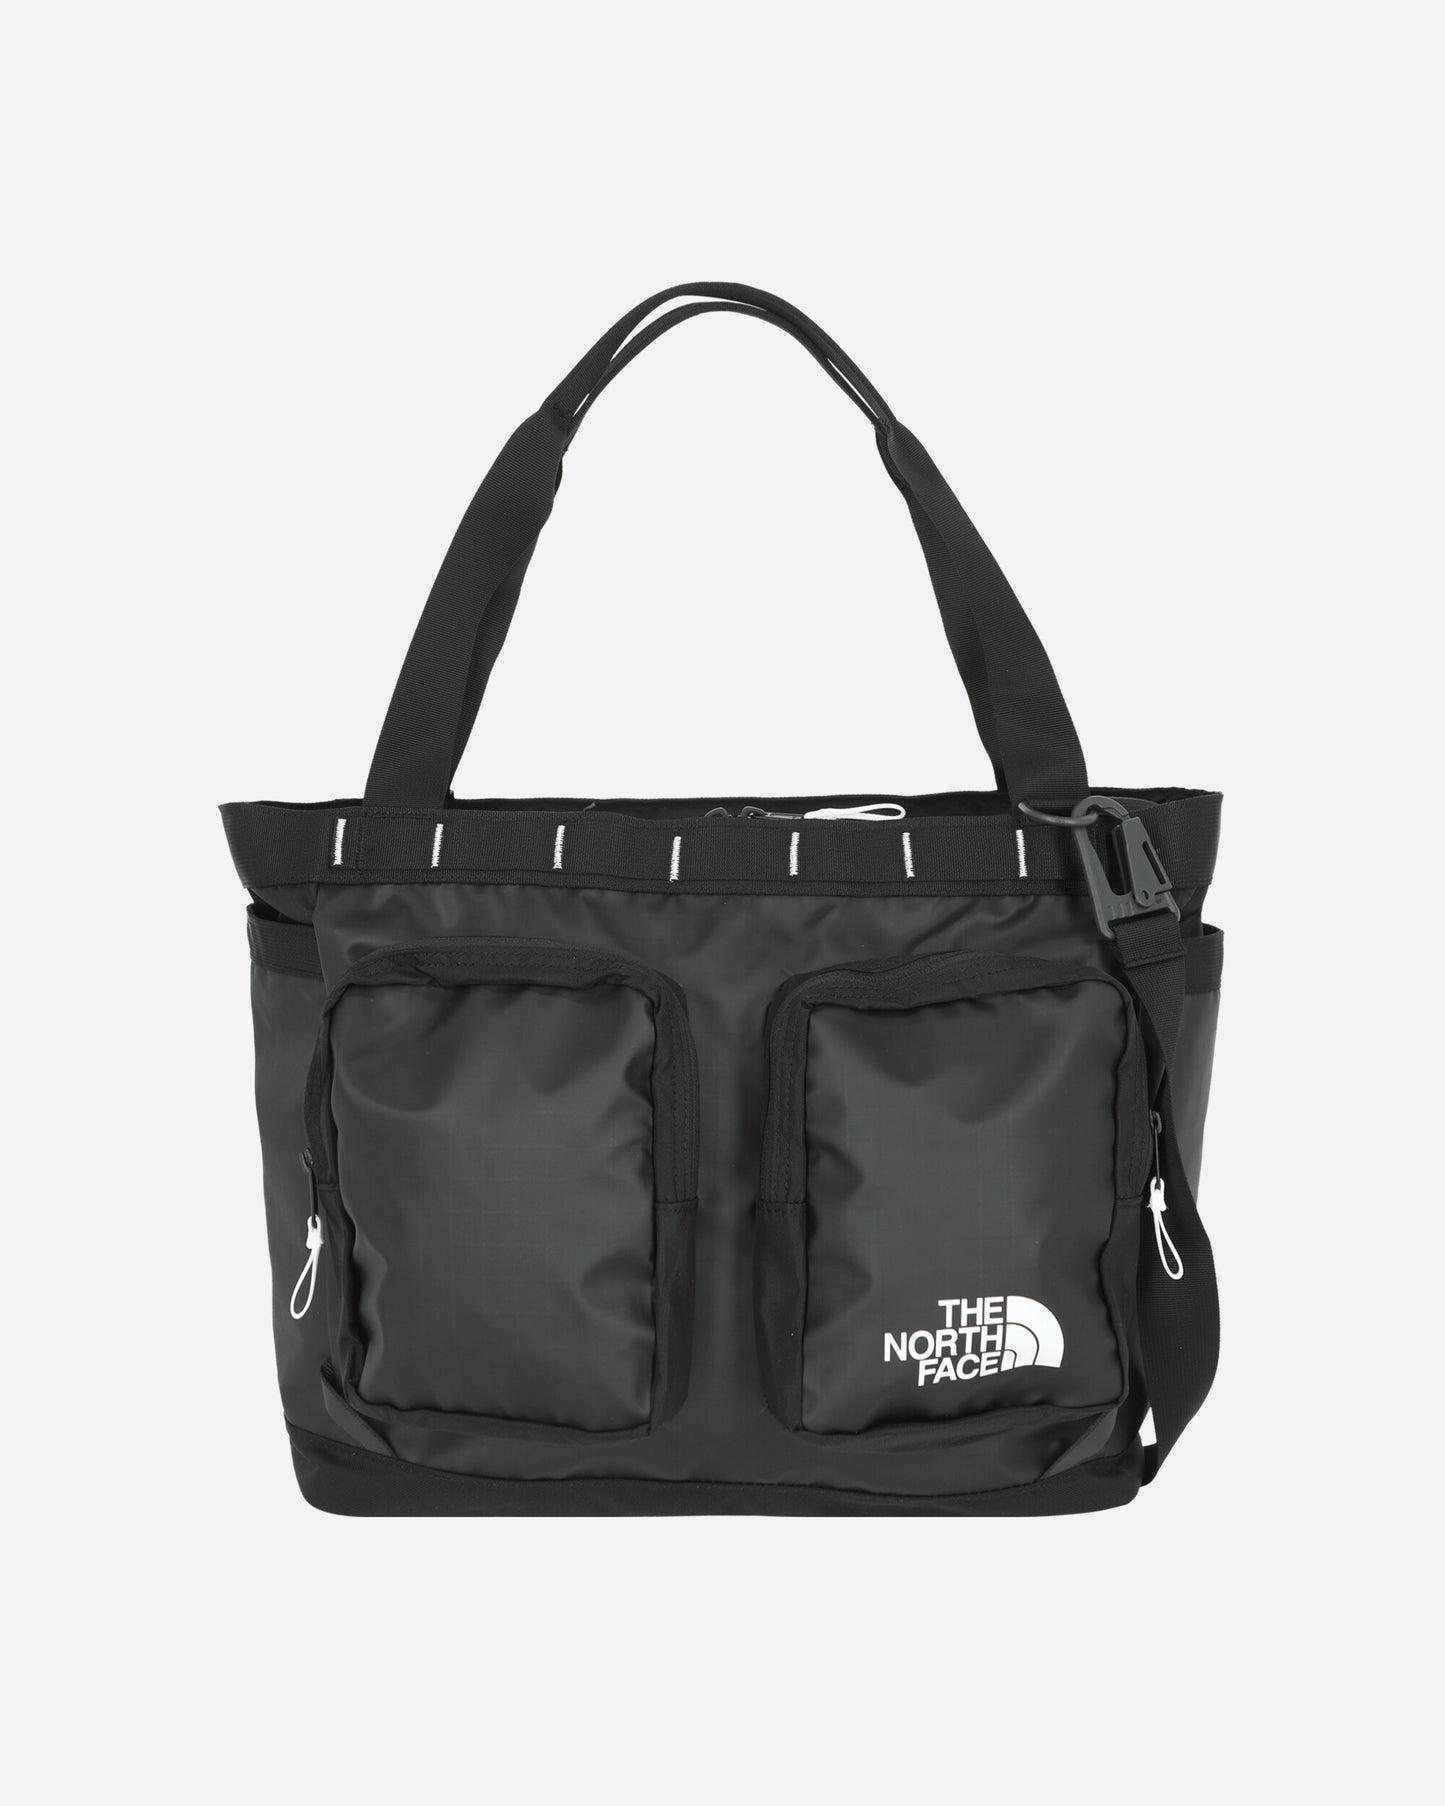 The North Face Base Camp Voyager Tote Tnf Black/Tnf White Bags and Backpacks Tote Bags NF0A81BM KY41